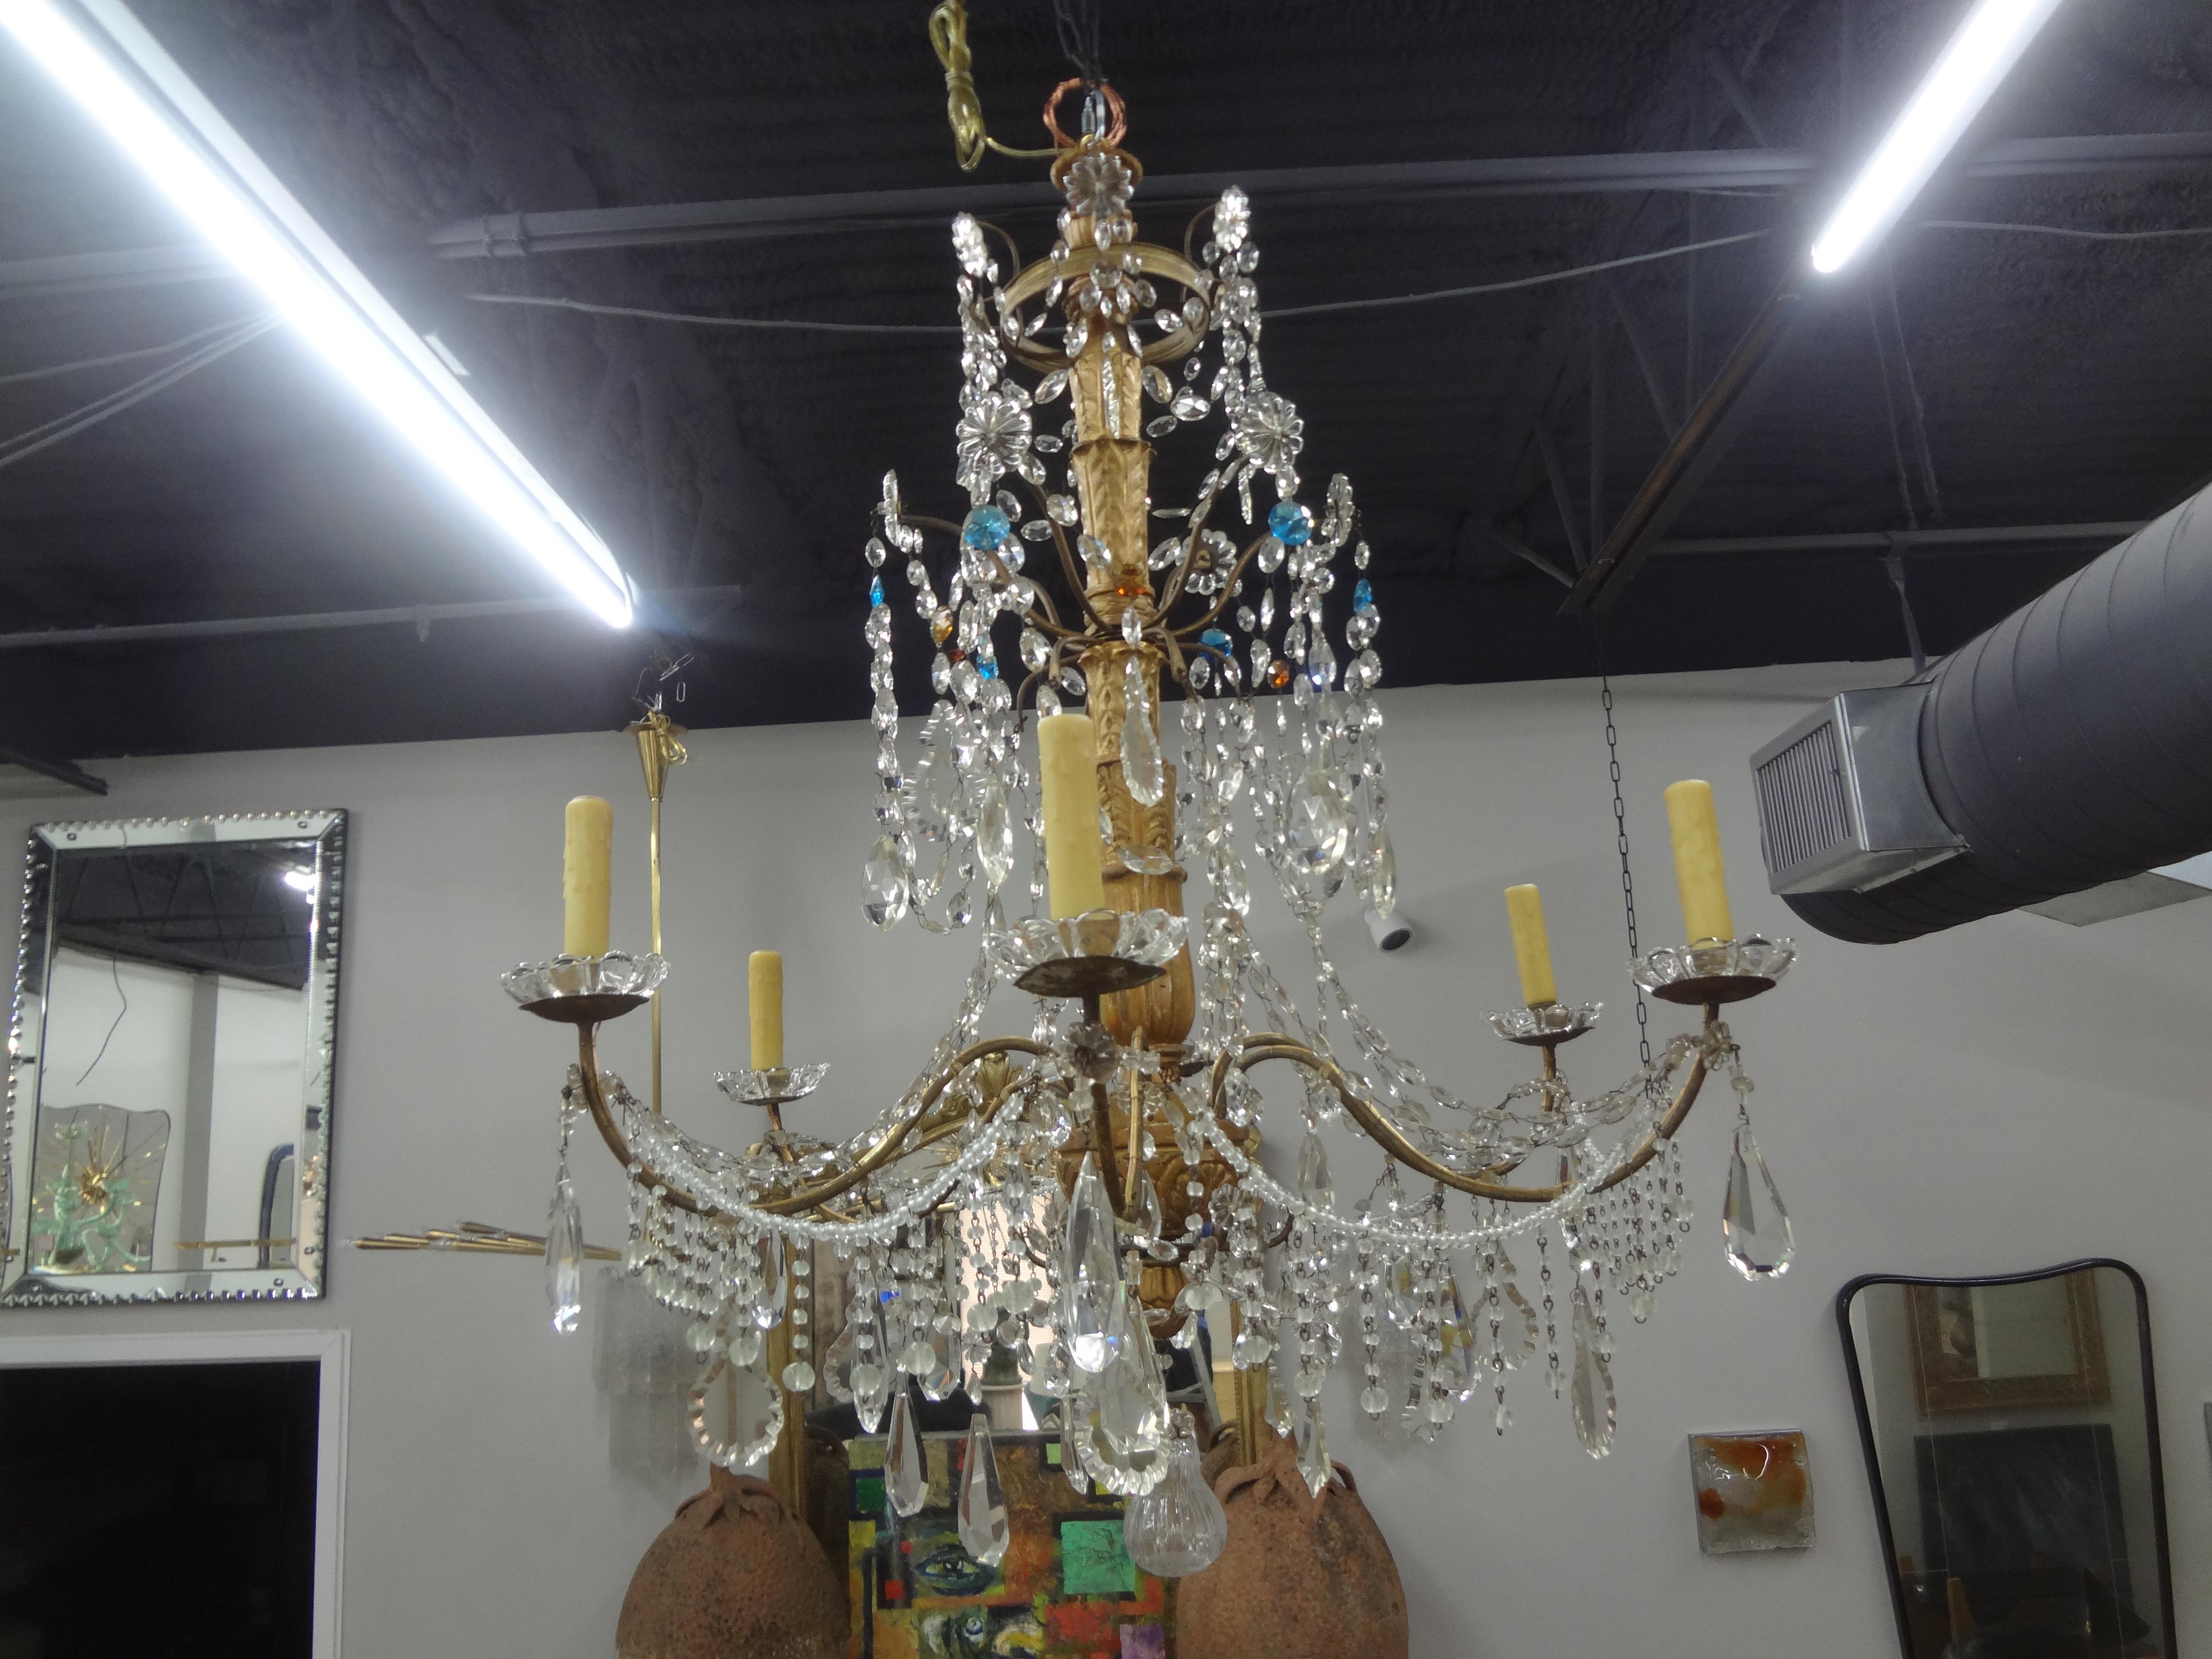 Large 19th century Italian Genovese giltwood and crystal chandelier.
This lovely antique Italian Genovese gilt wood and crystal Baroque style chandelier has been newly wired with new sockets for the U.S. market.
Stunning!